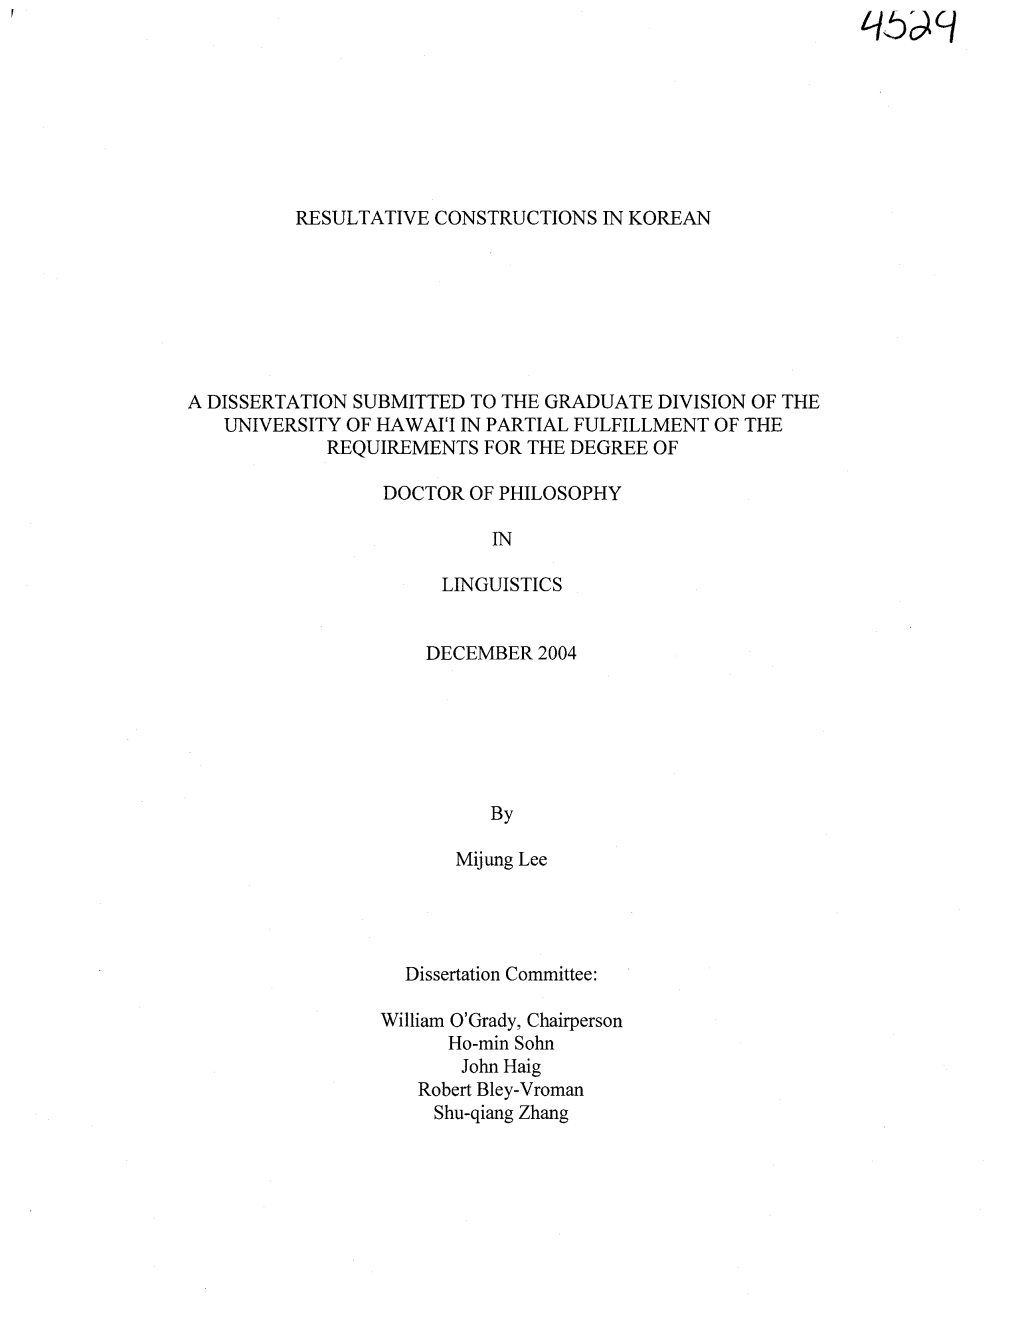 Resultative Constructions in Korean a Dissertation Submitted to the Graduate Division of the University of Hawai'i in Partial Fu